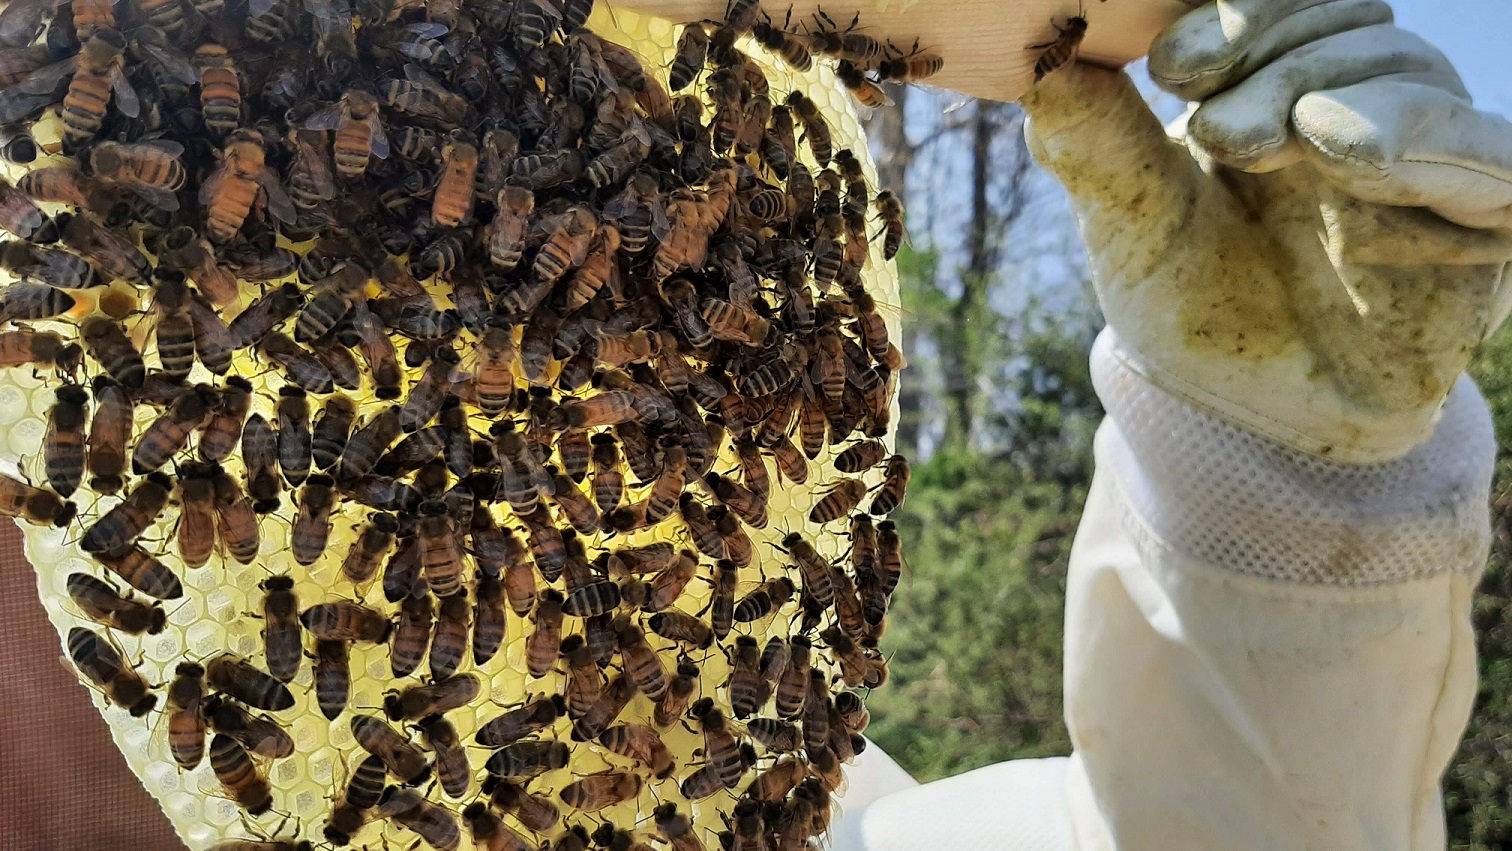 A piece of honeycomb covered in a swarm of honeybees.